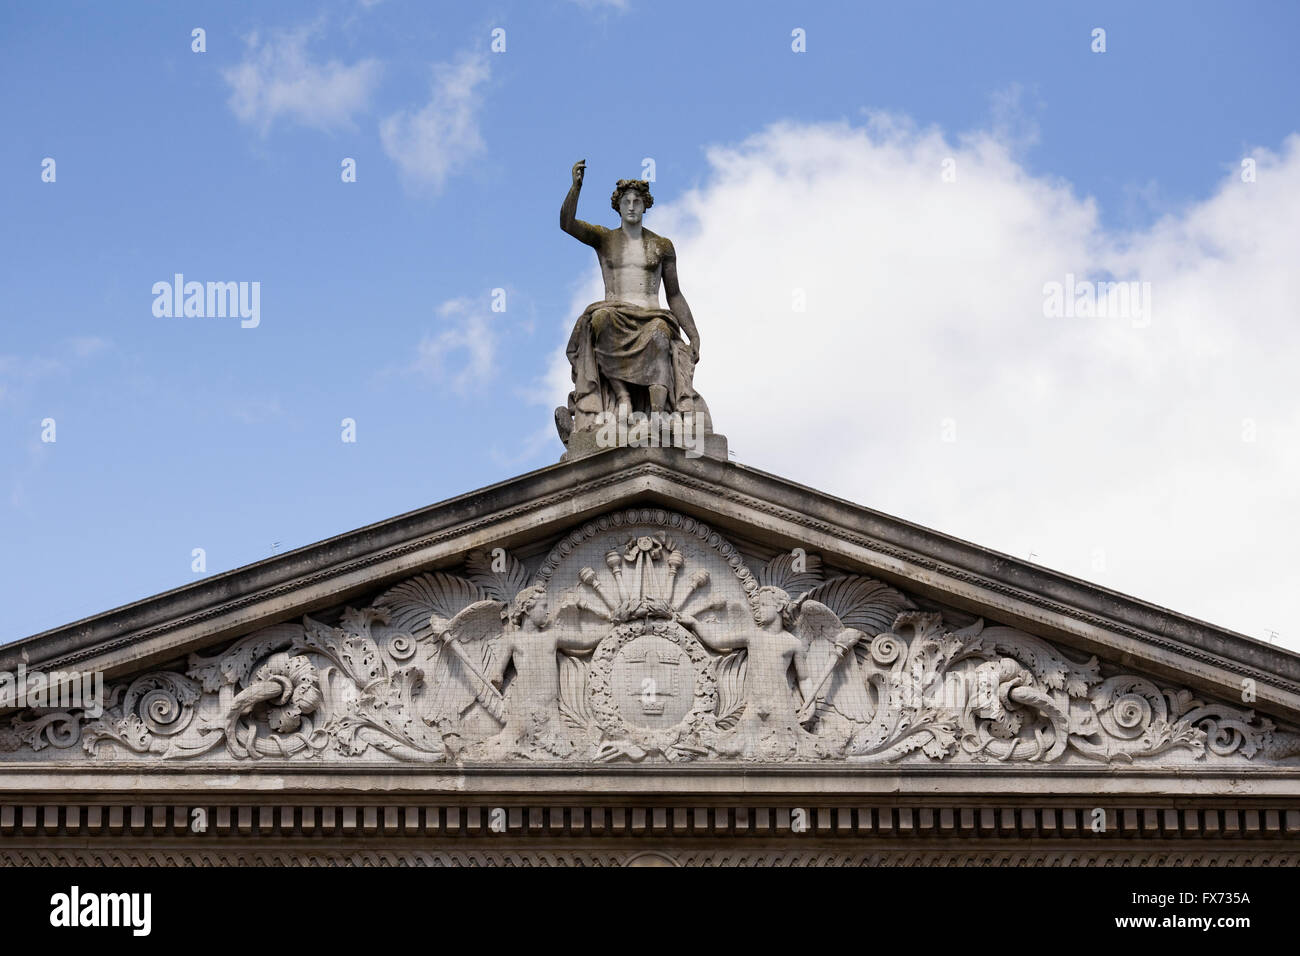 Stone carving above the Ashmolean Museum in Oxford. Stock Photo